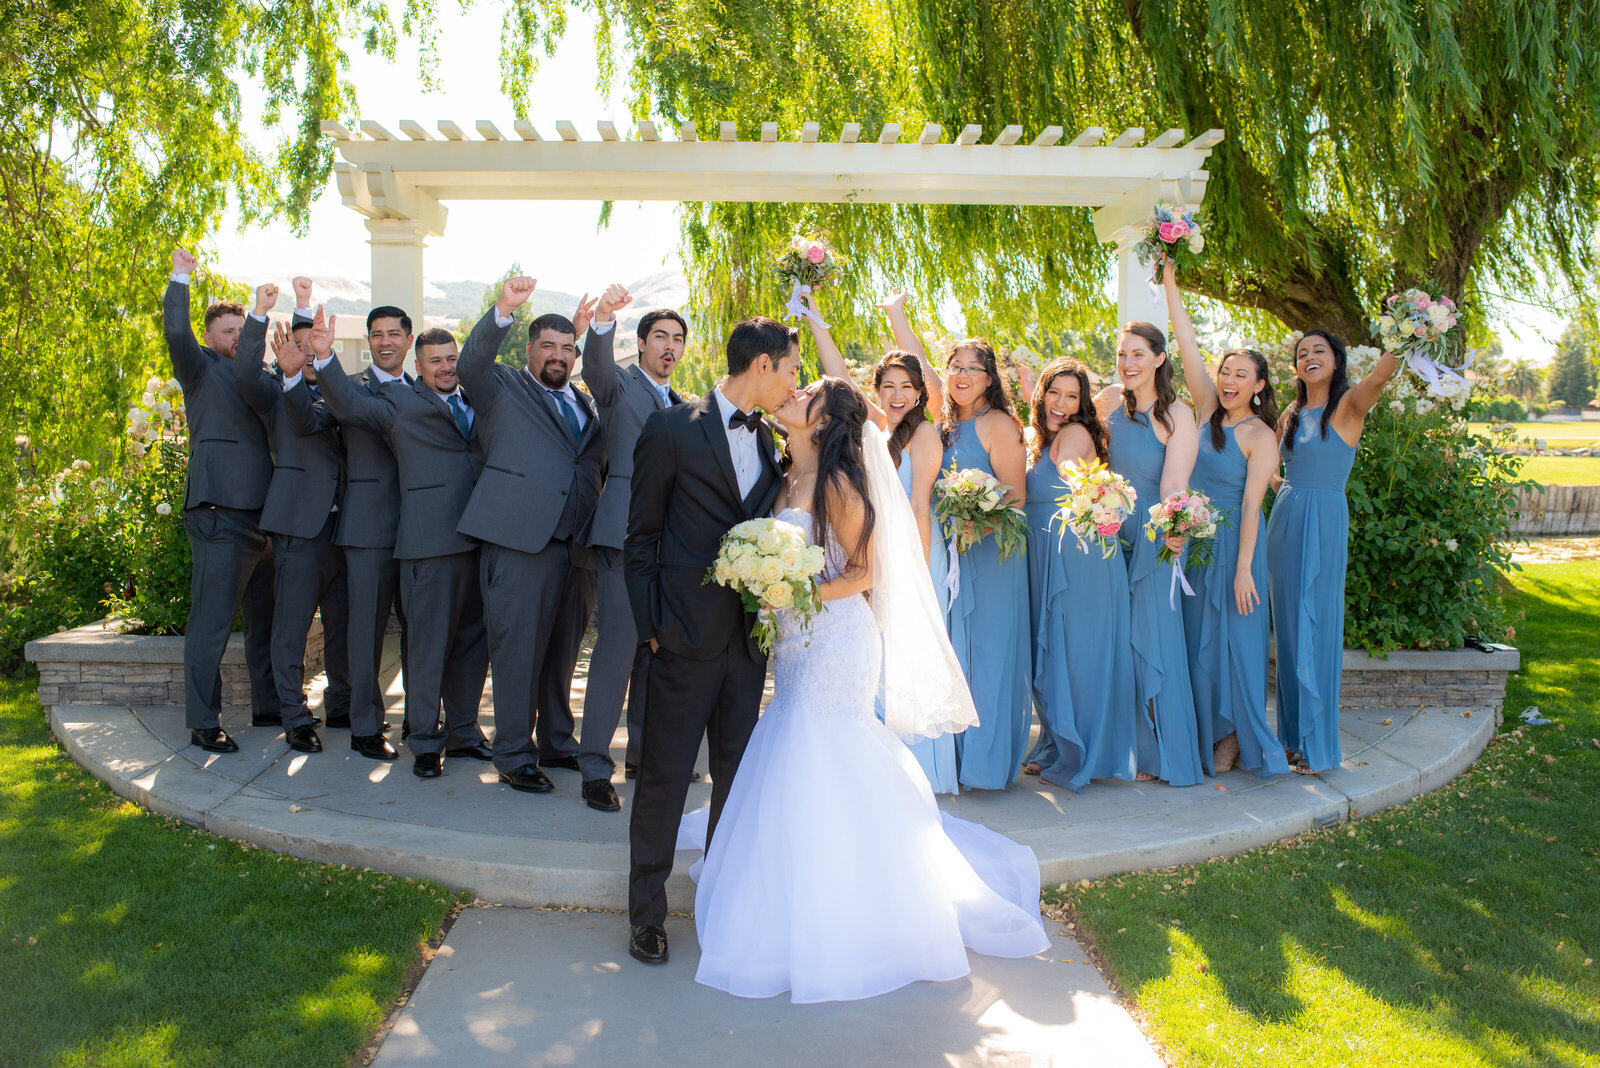 Bride and groom kiss with their bridal party cheering them on behind them. Photo by Sacramento Wedding Photographer Philippe Studio Pro.